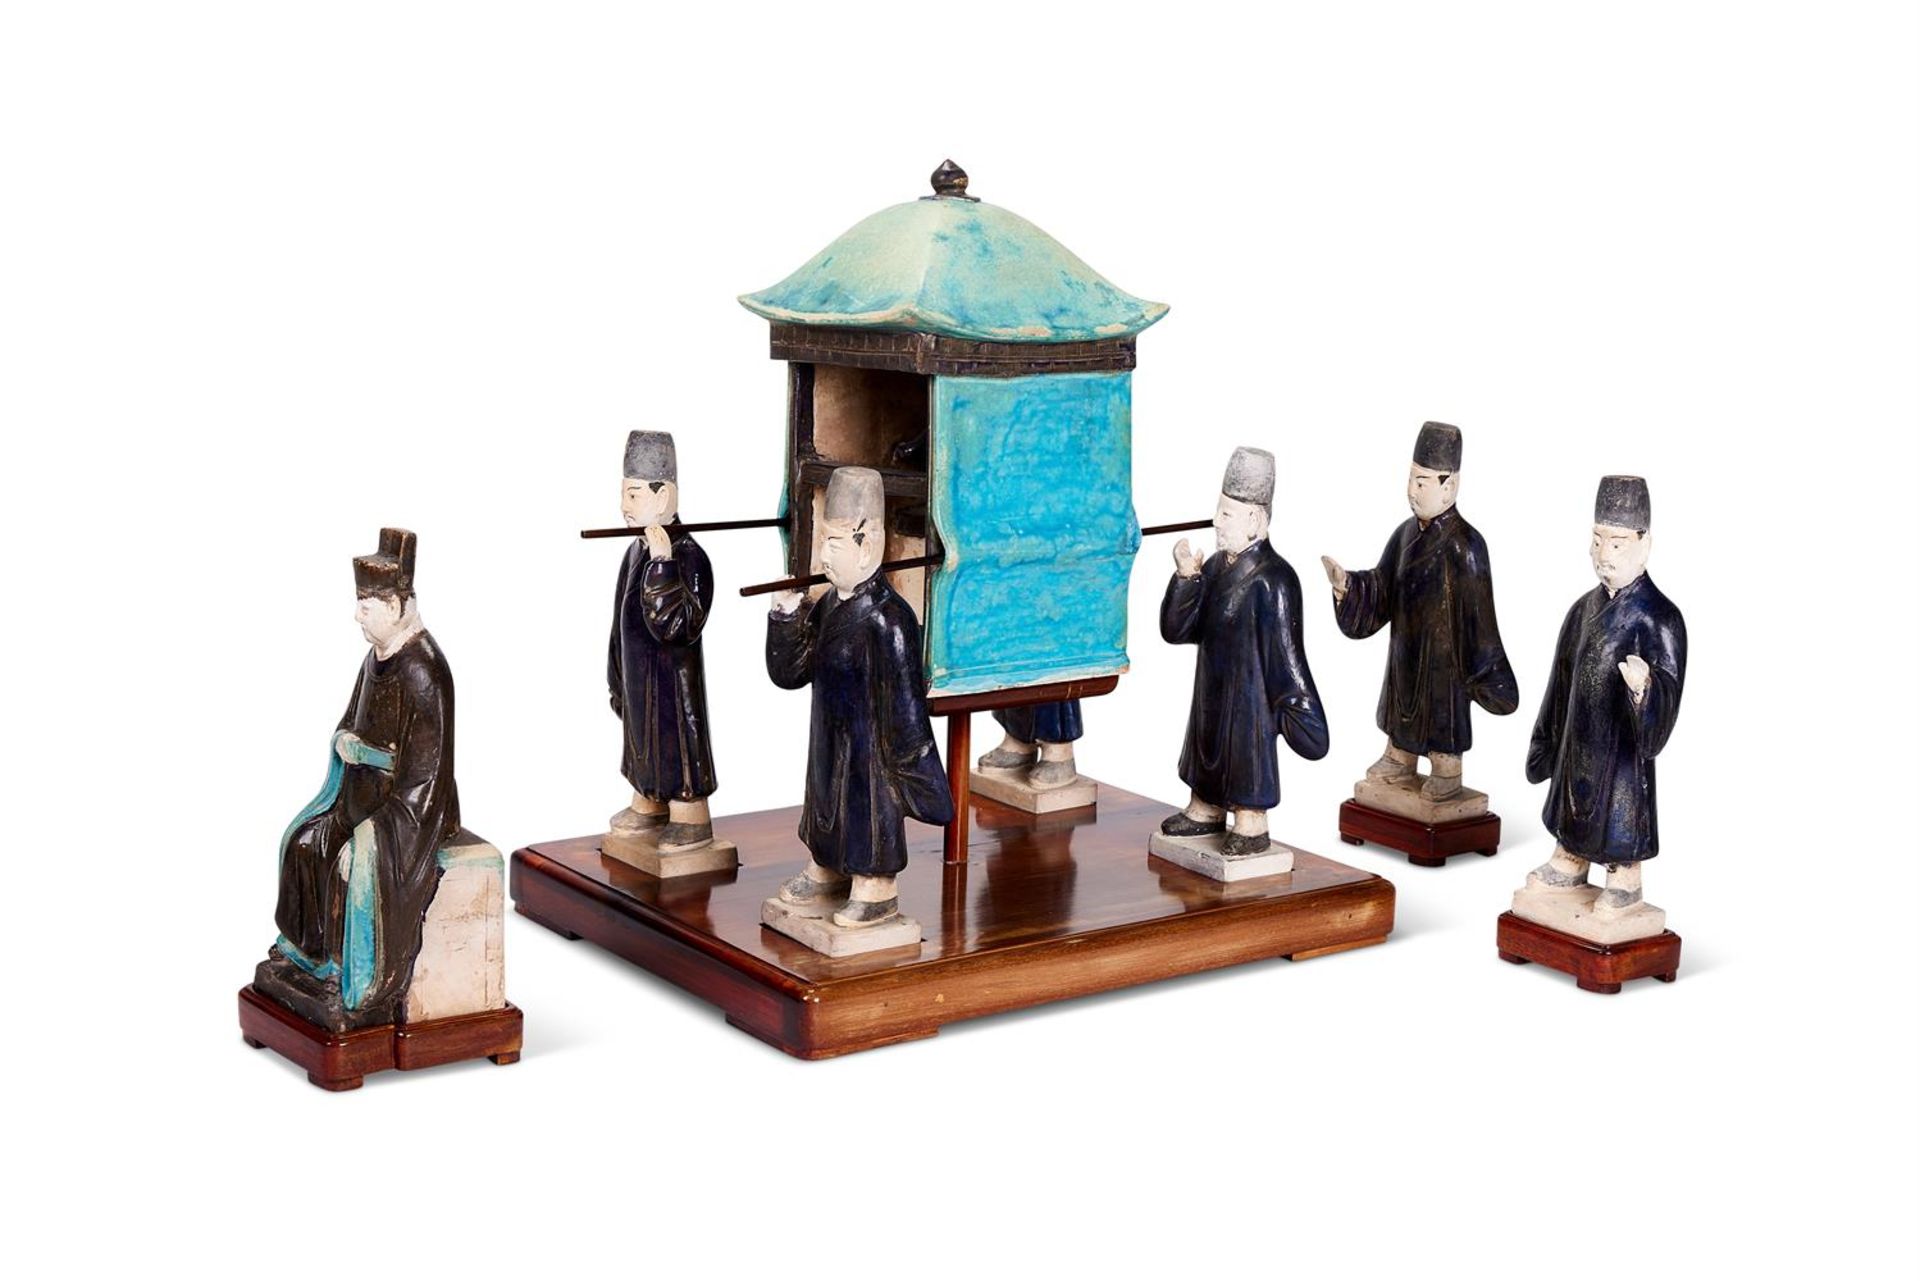 A CHINESE SANCAI GLAZED MODEL OF A SEDAN CHAIR AND ATTENDANT FIGURES, MING DYNASTY